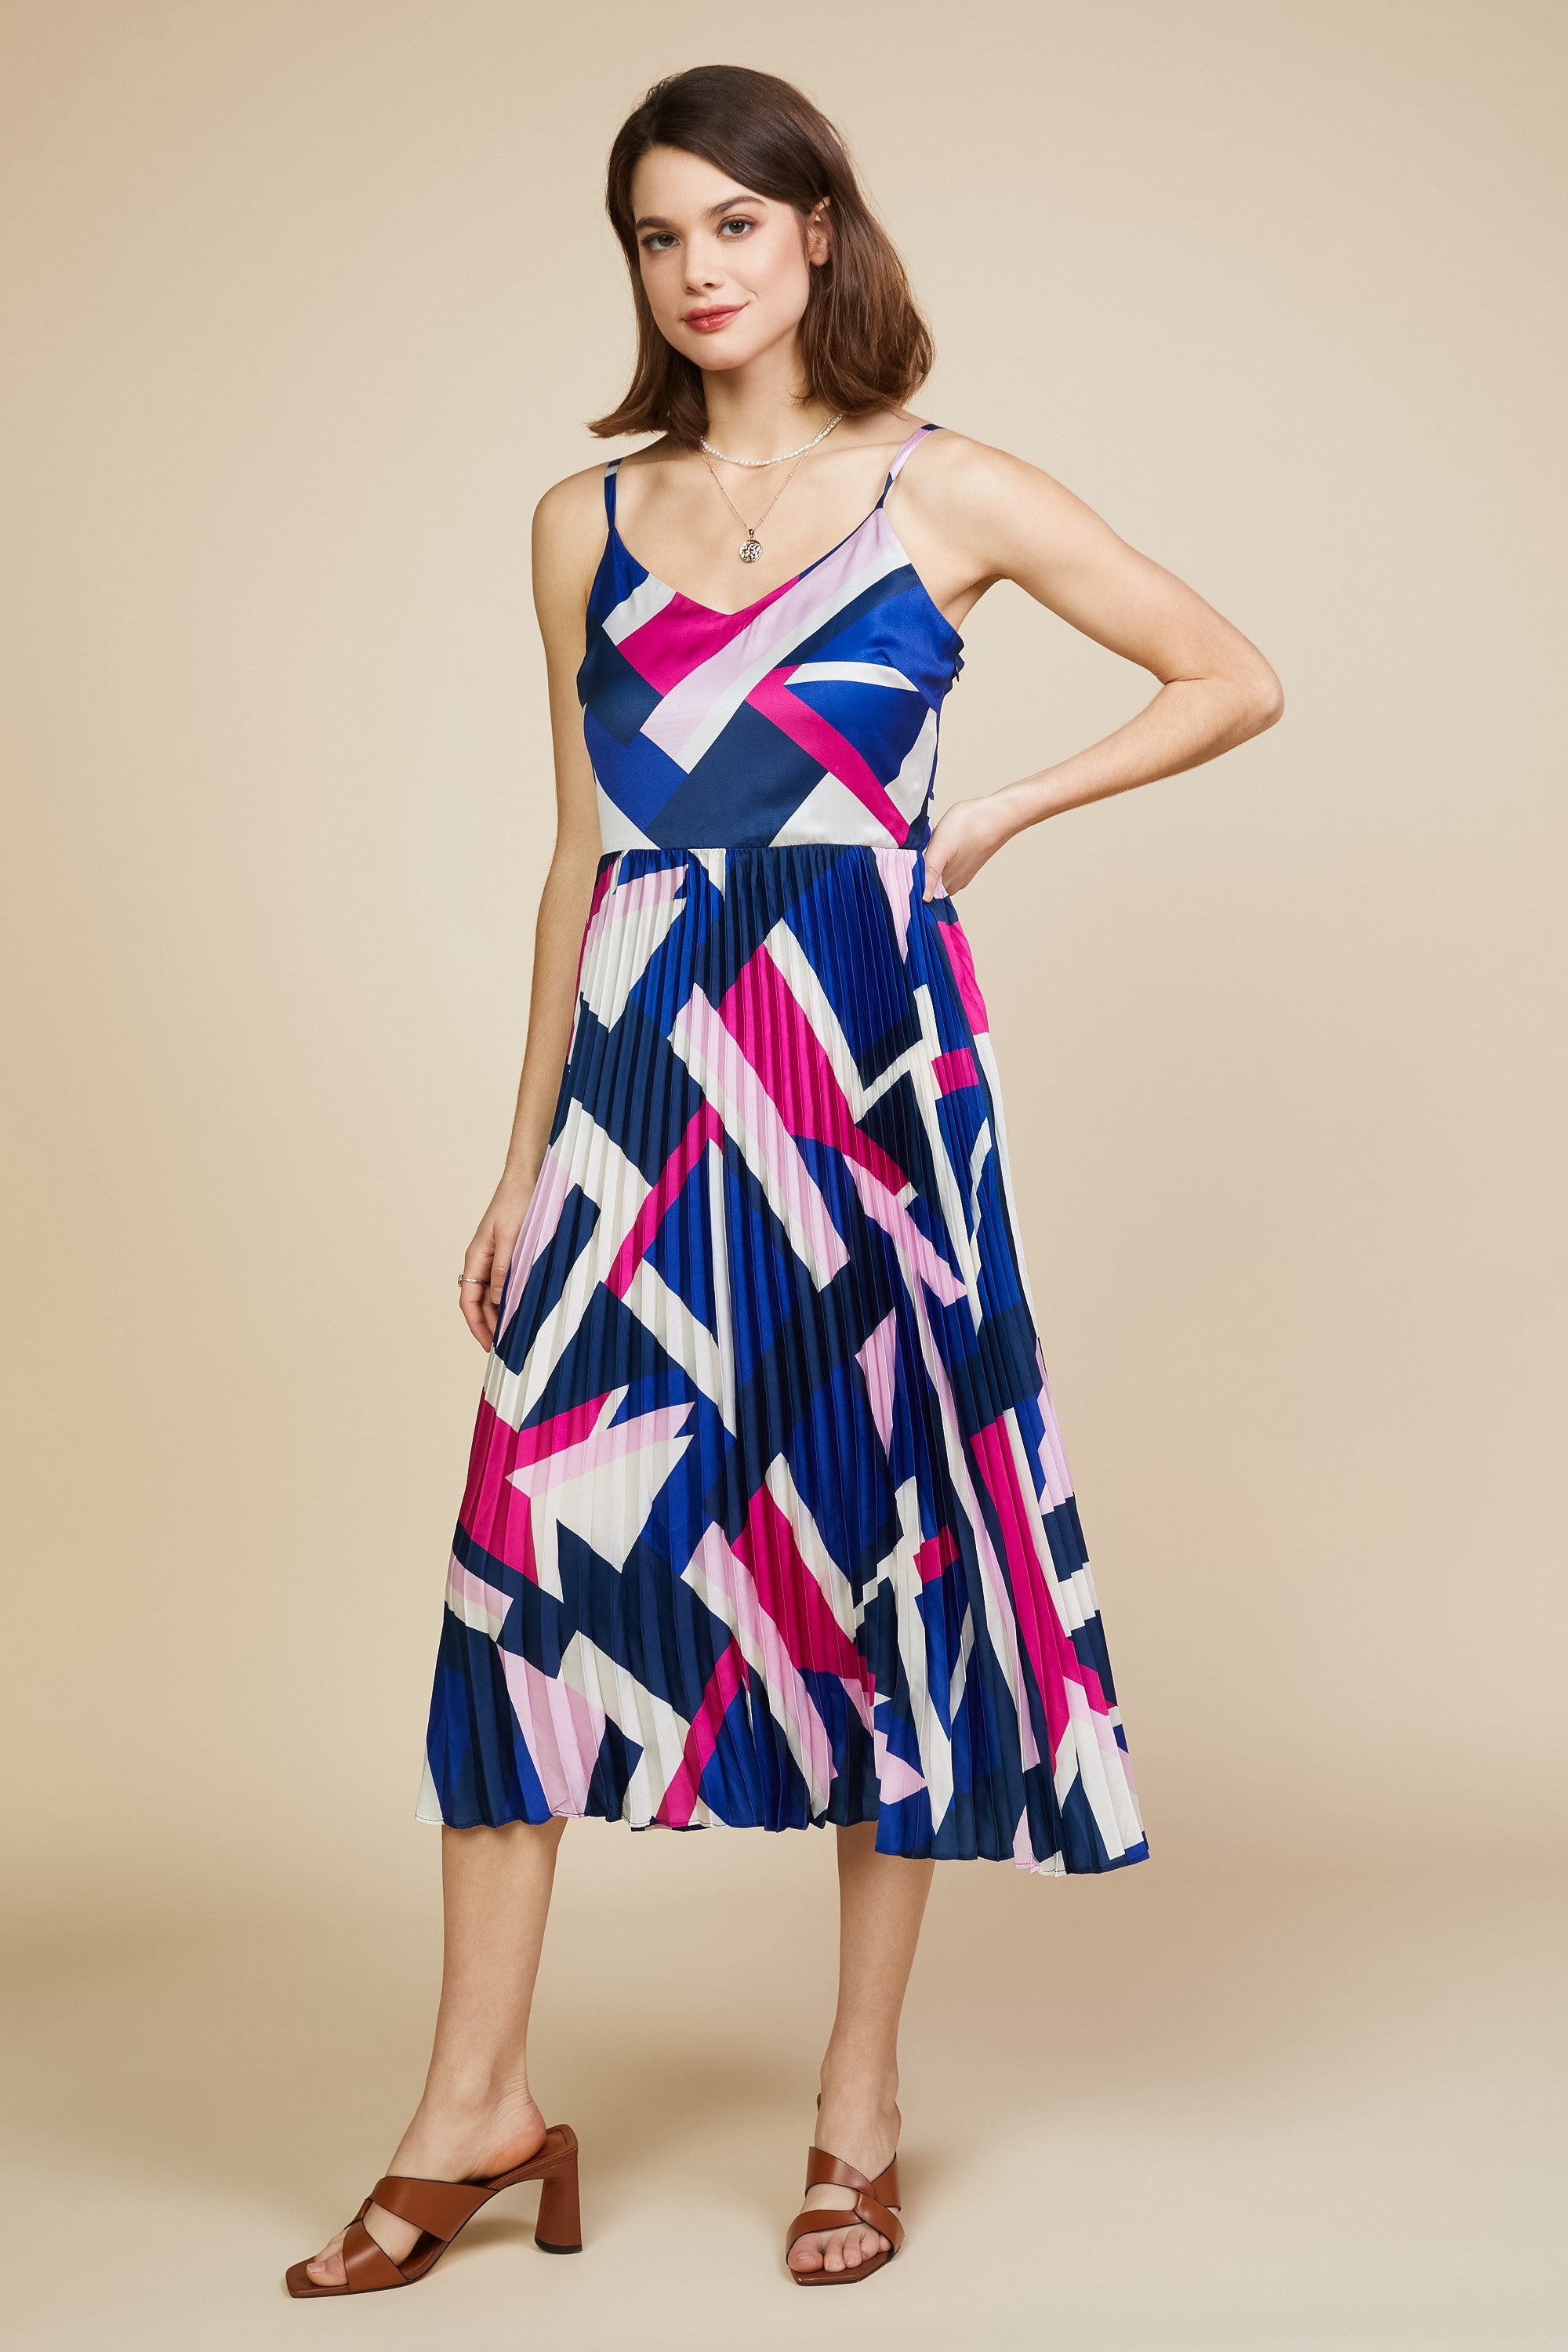 Skies Are Blue Pleated to Meet You Dress - Navy/Hyper Pink, v-neck, spaghetti strap, pleated skirt, curvy